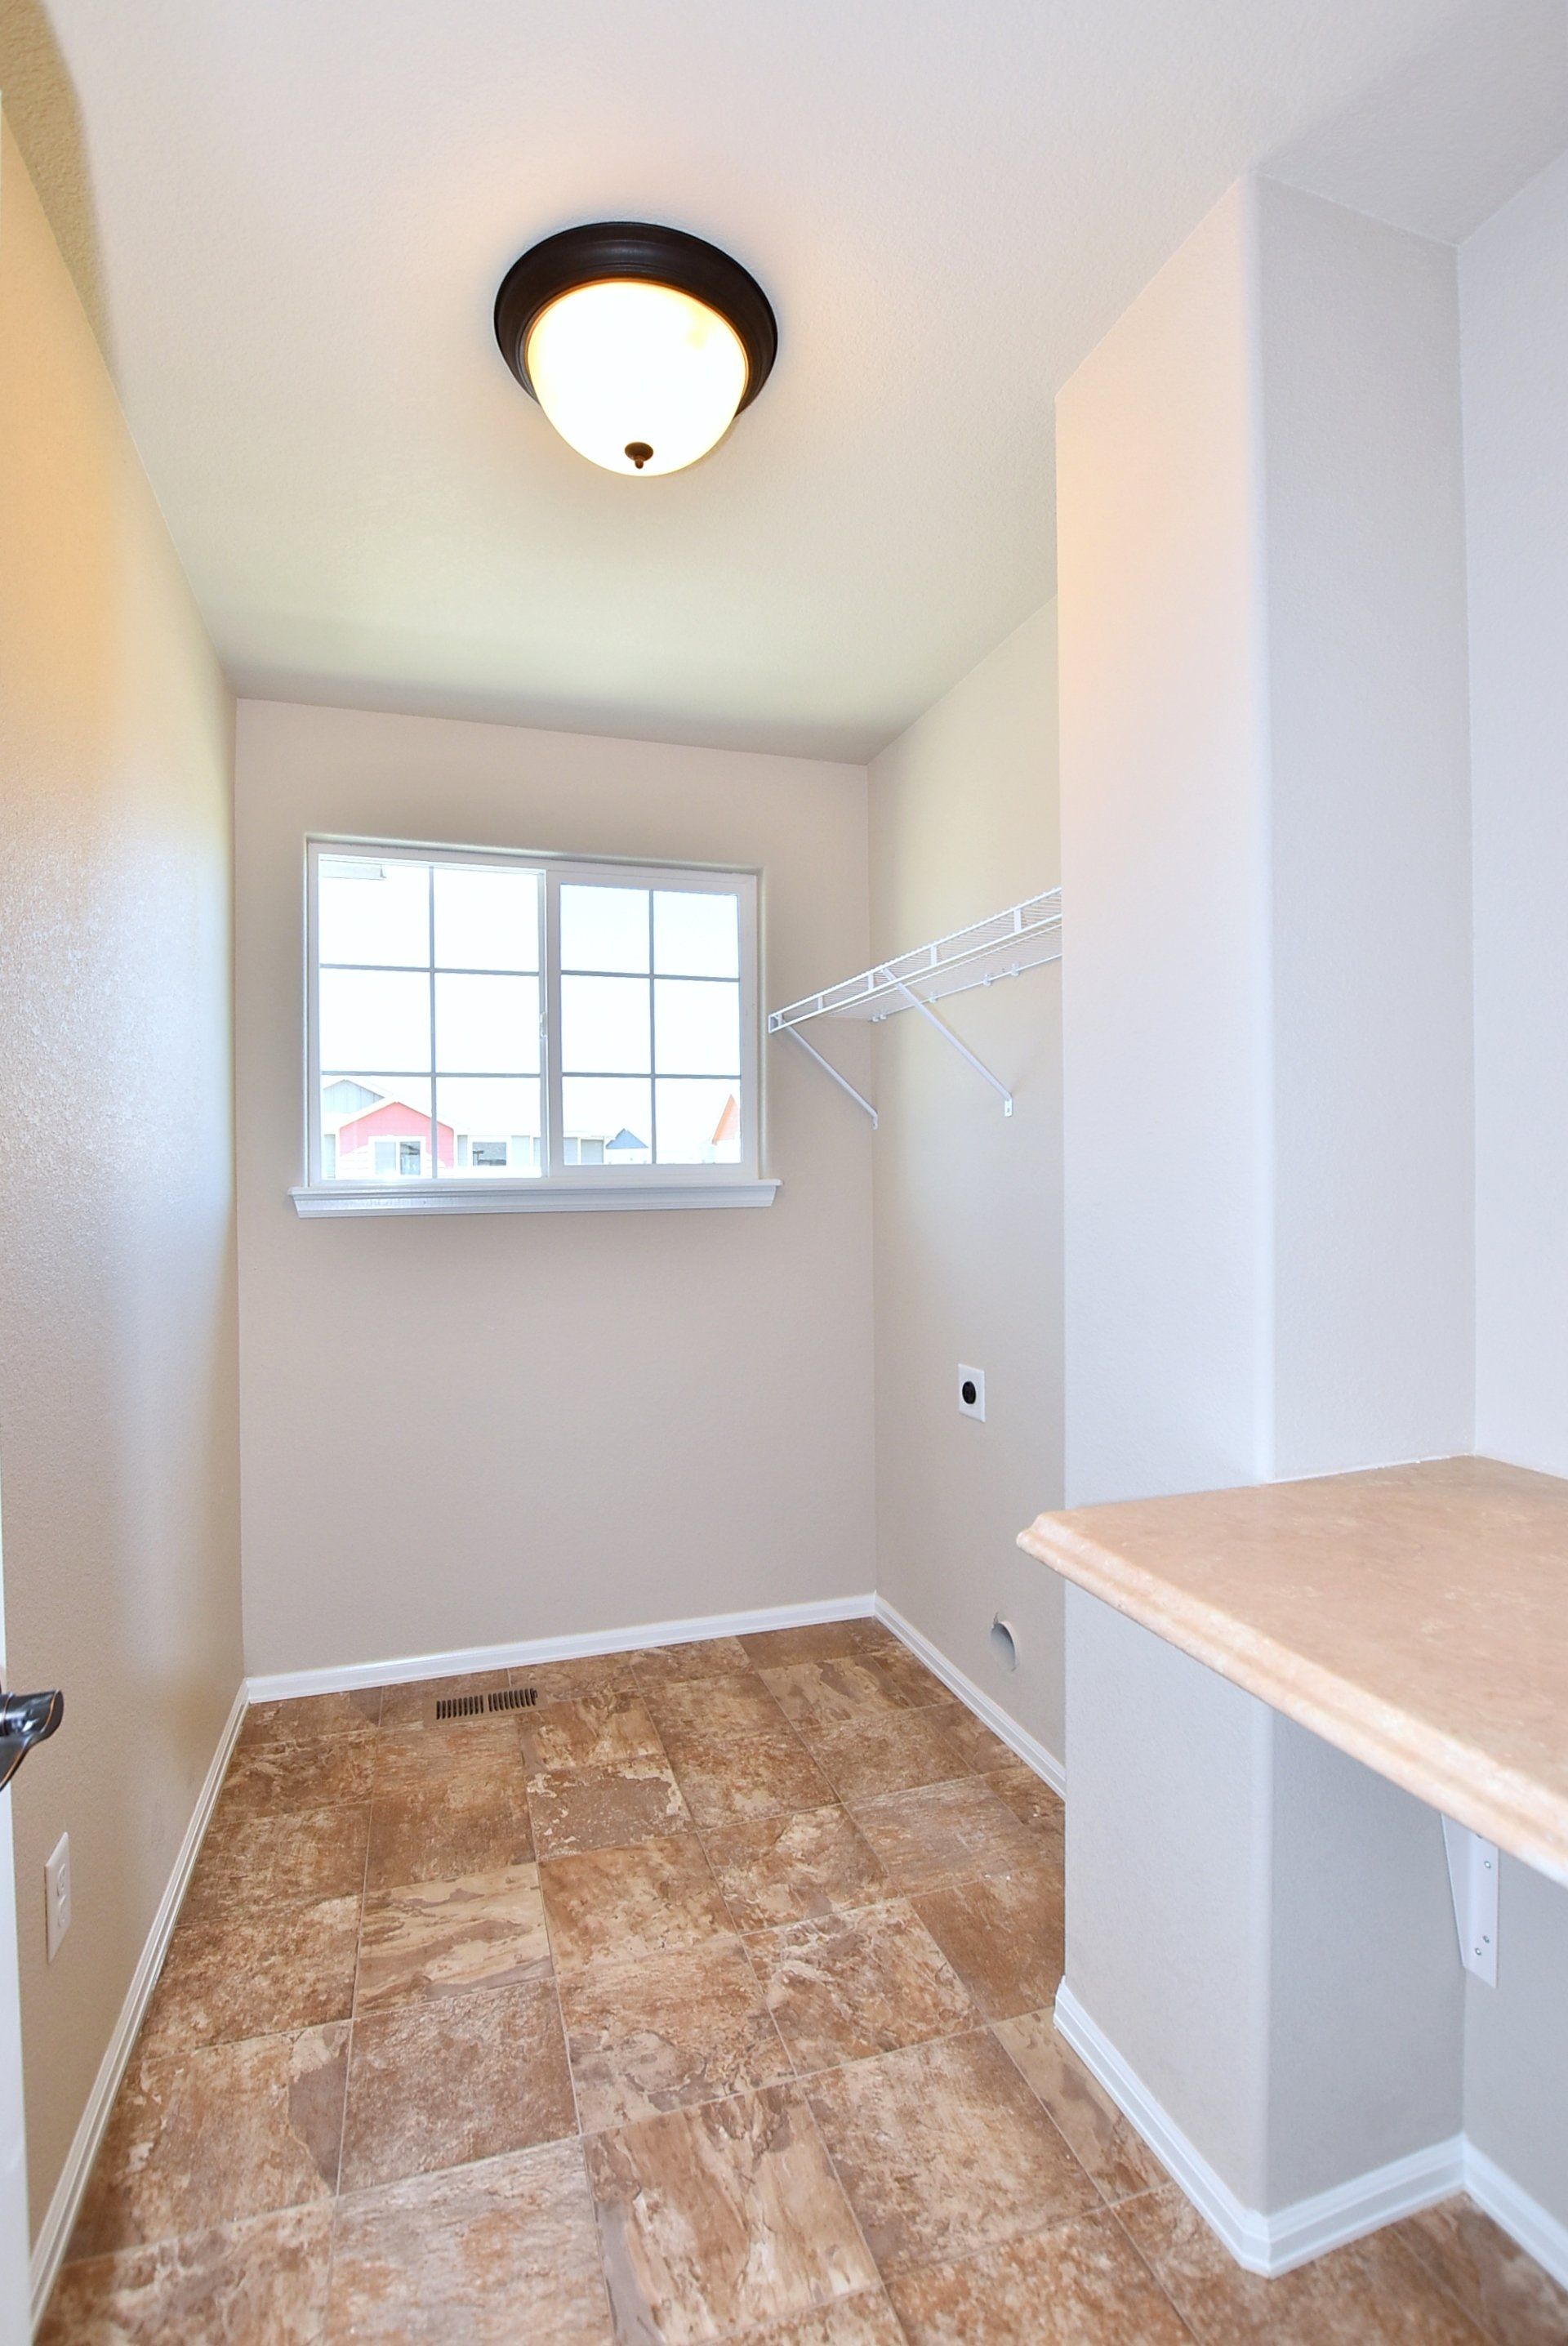 Laundry room with tile flooring and shelf